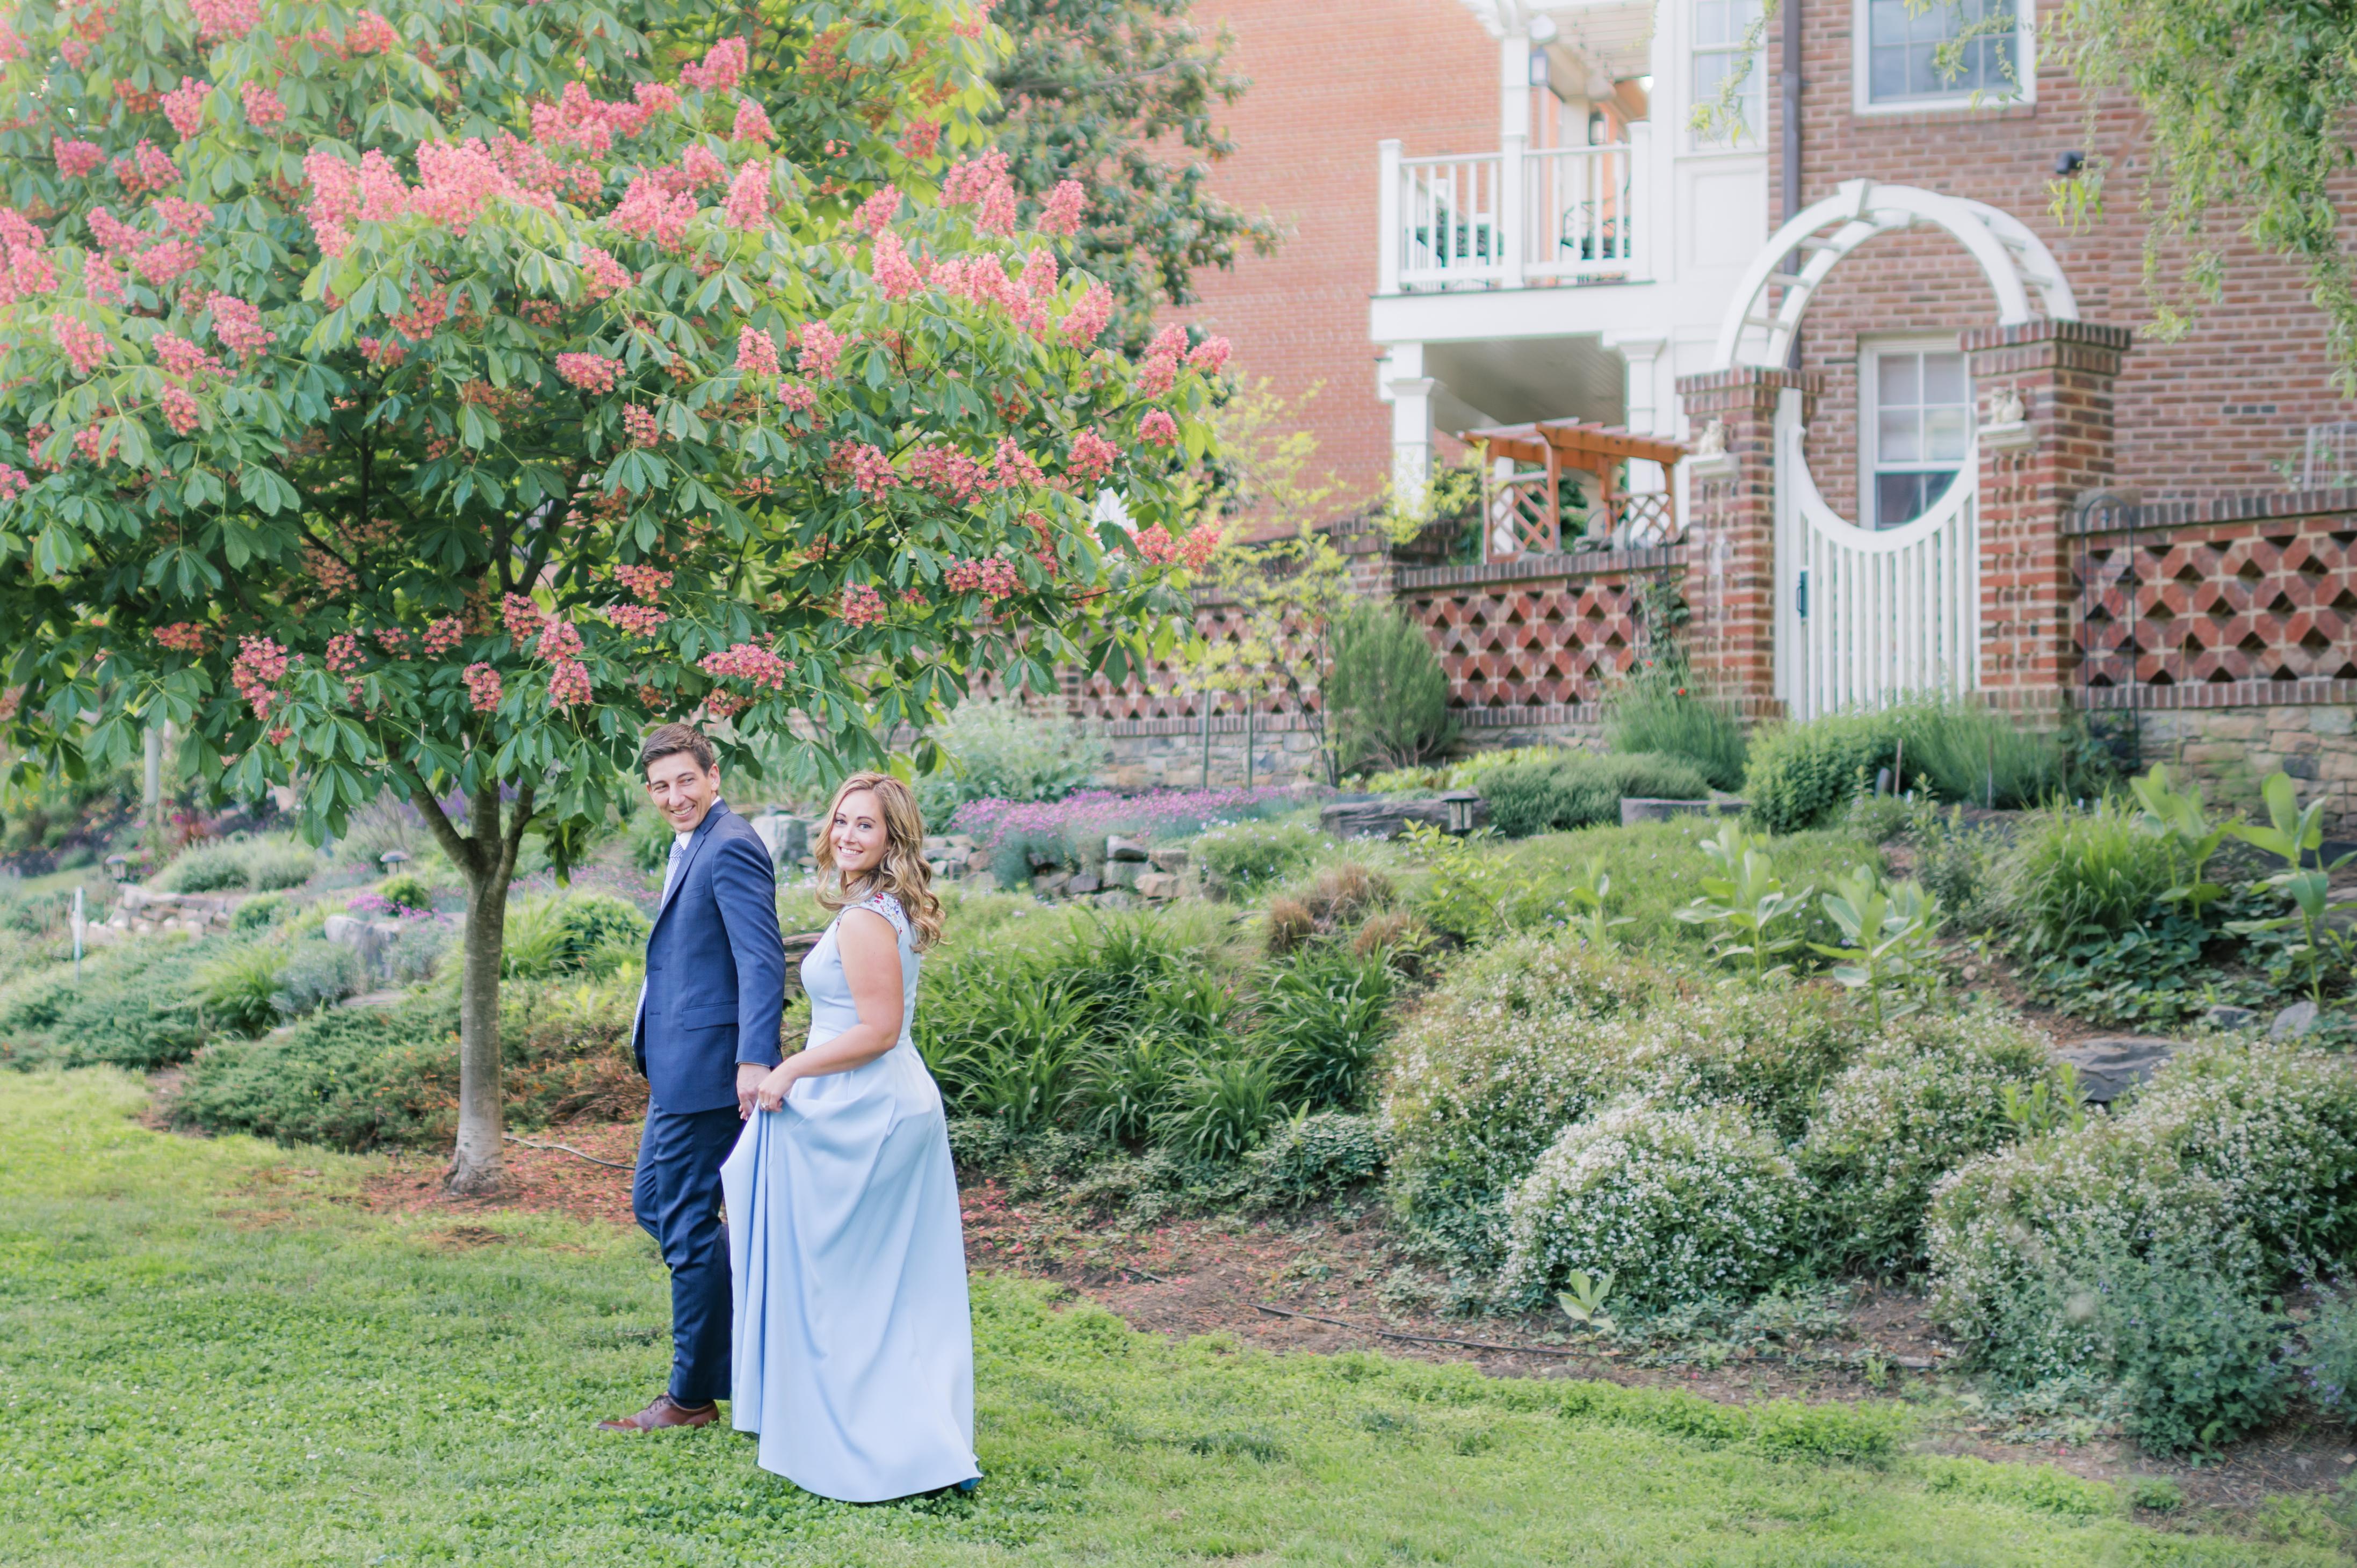 The Wedding Website of Kelsey O’Brien and Ryan Vosburgh